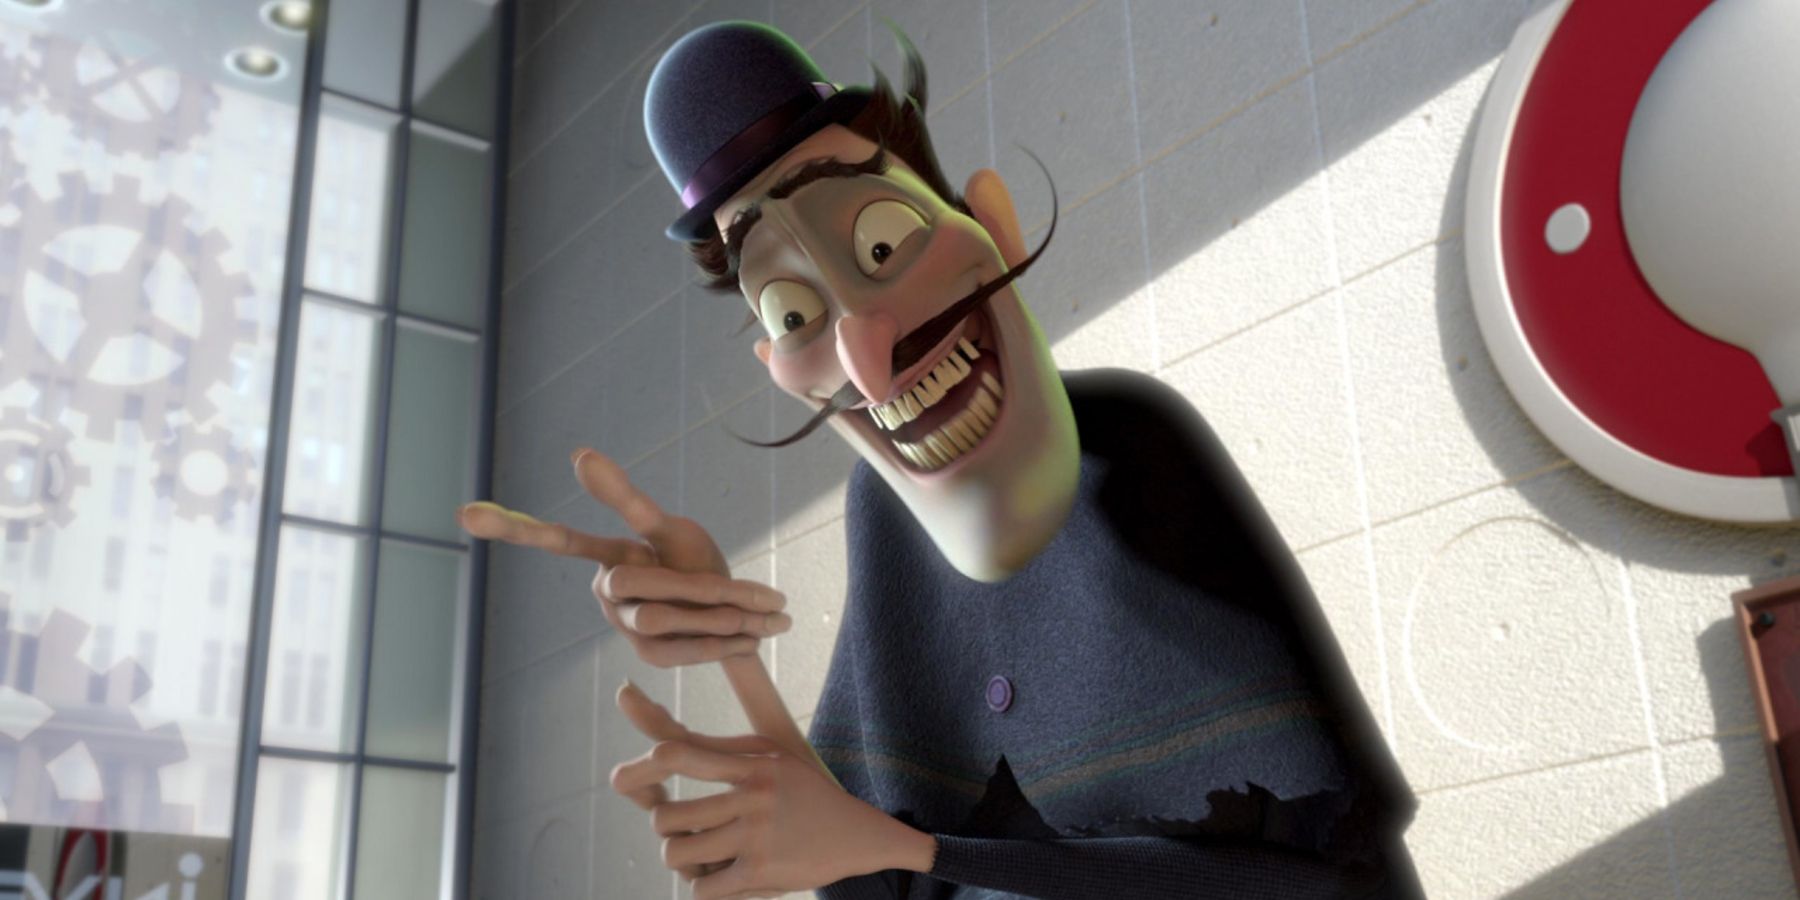 Bowler Hat Guy - Meet The Robinsons